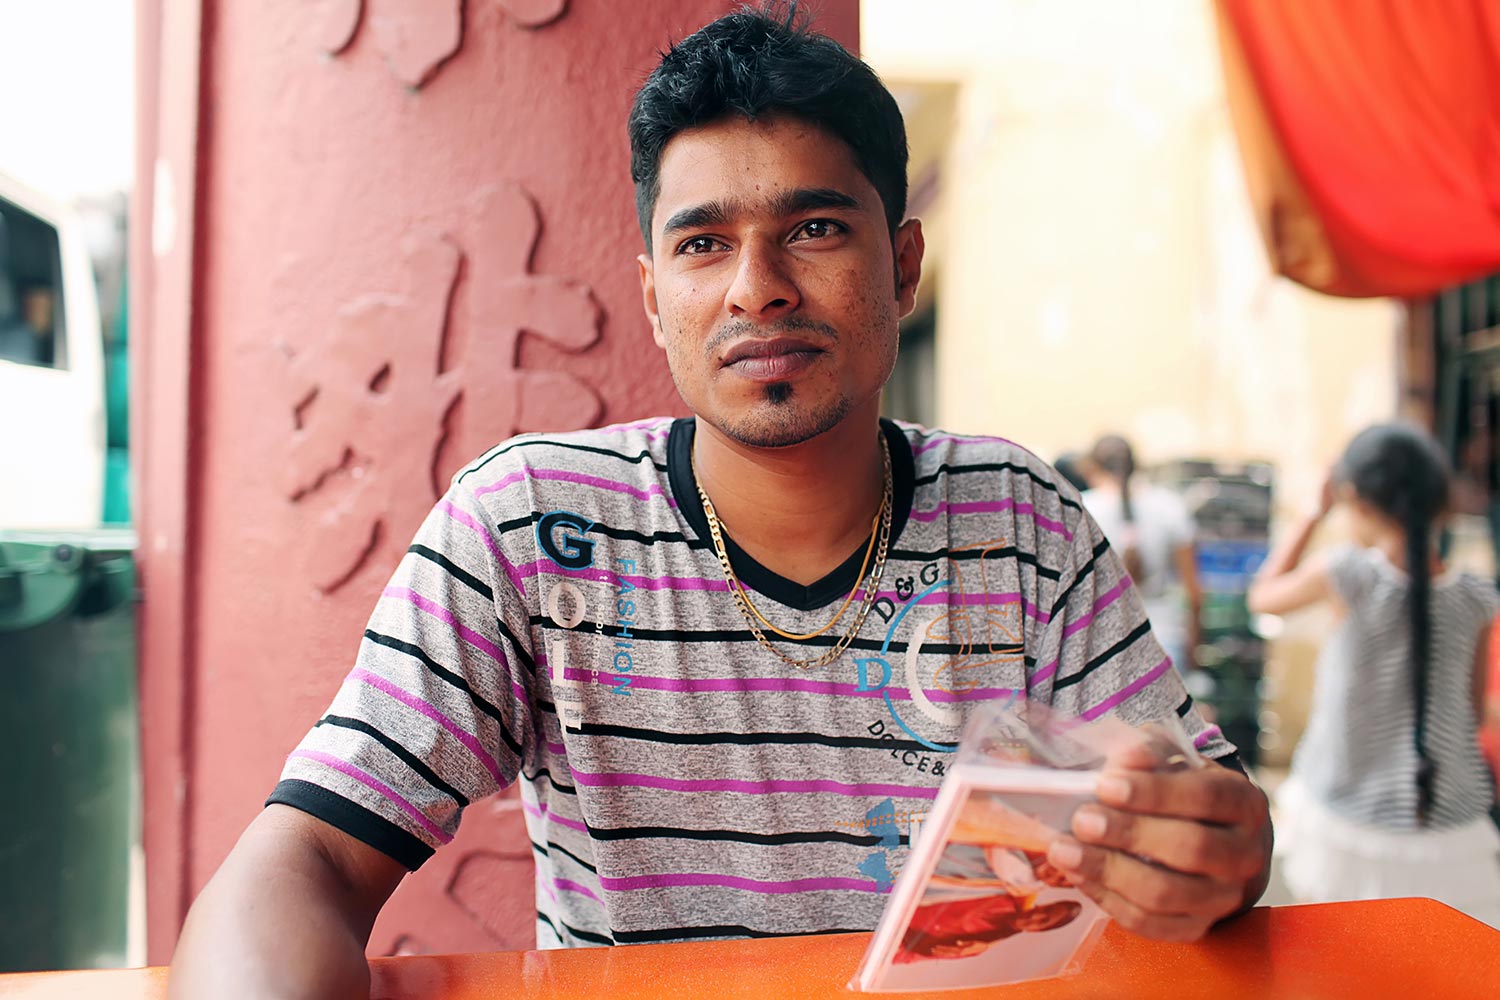 This is Saiful, who sheds his usual reticence whenever he plays carom or dances